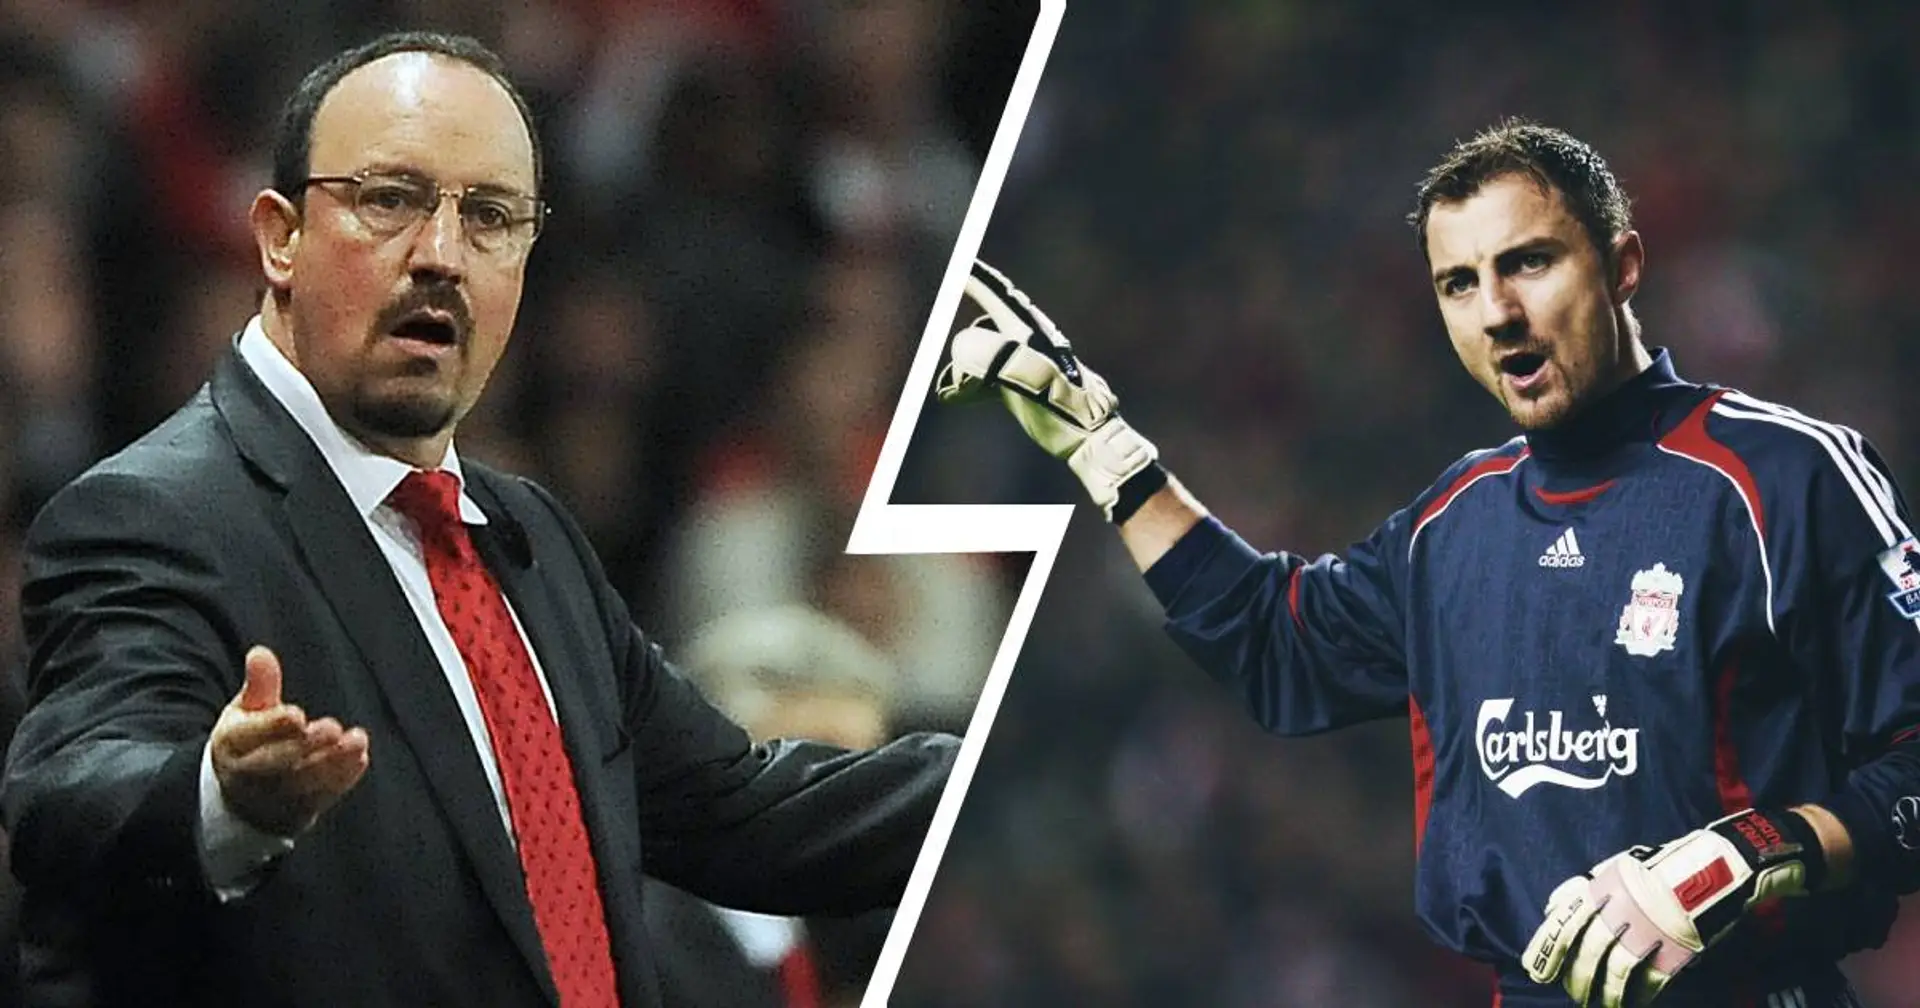 Jerzy Dudek explains why he almost punched Rafa Benitez in the face back in 2005